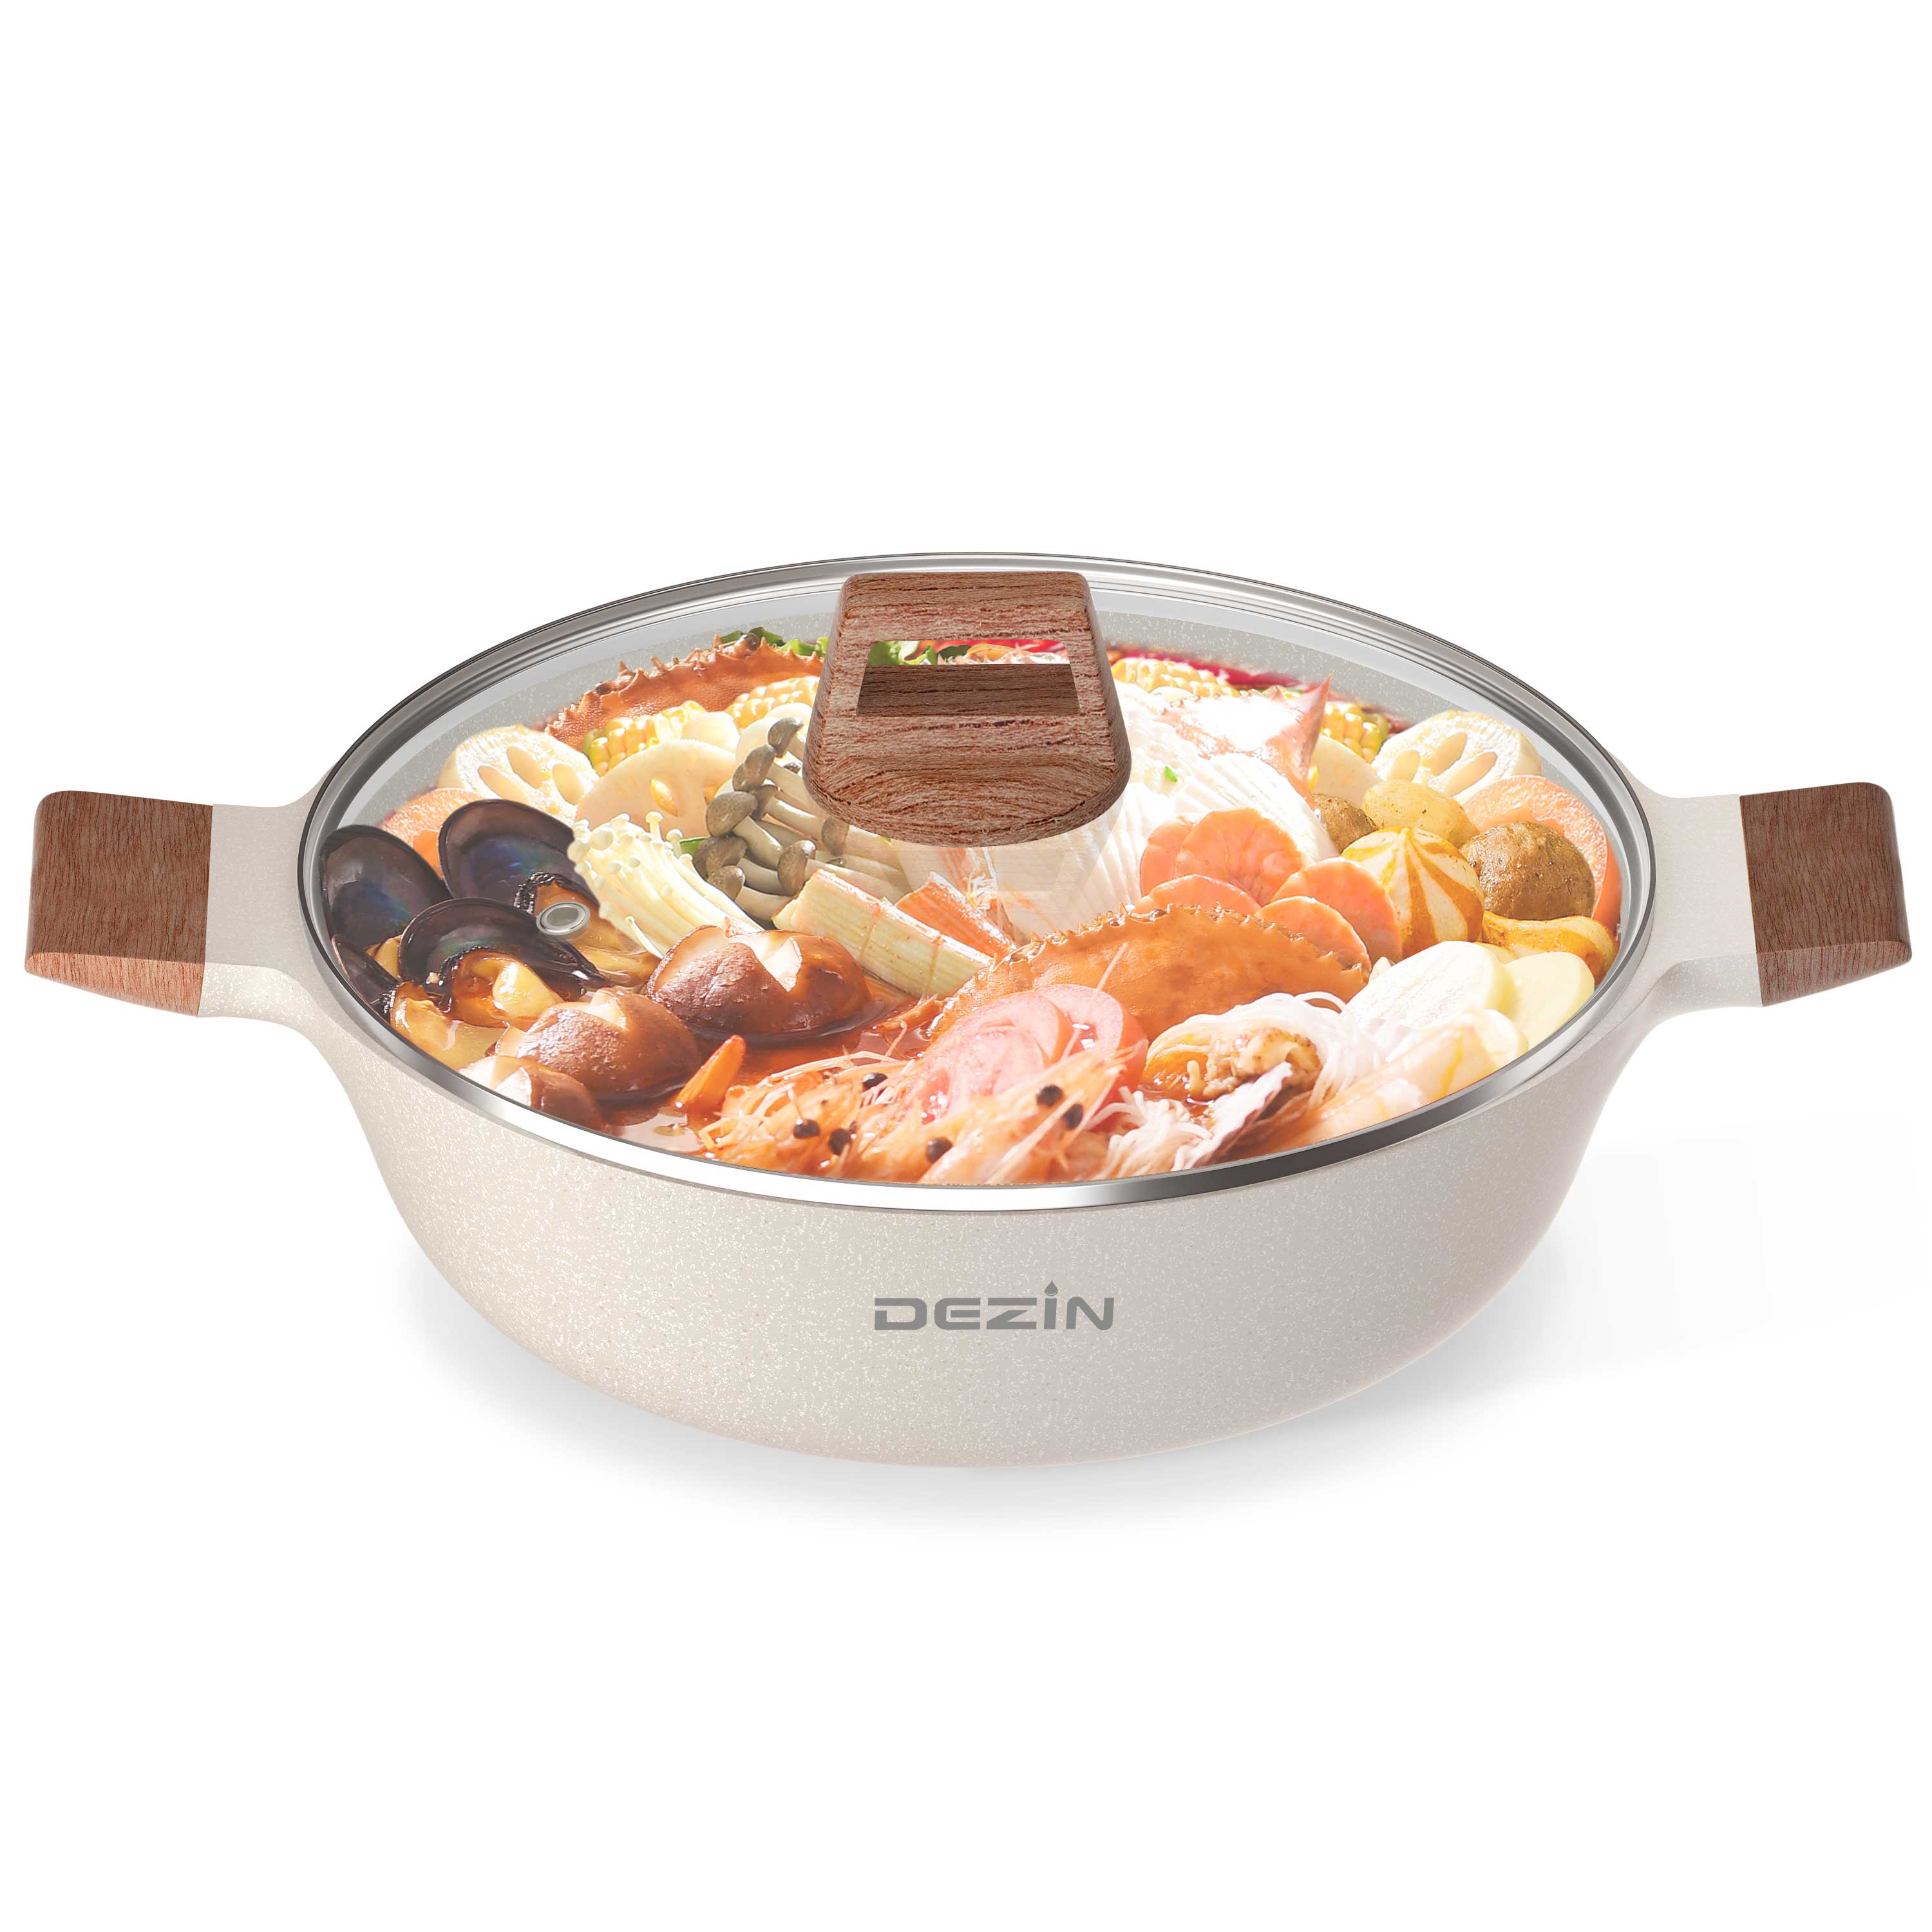 The ultimate Hot Pot spread with the Home & Camp Burner and the Aluminum  Caldero.